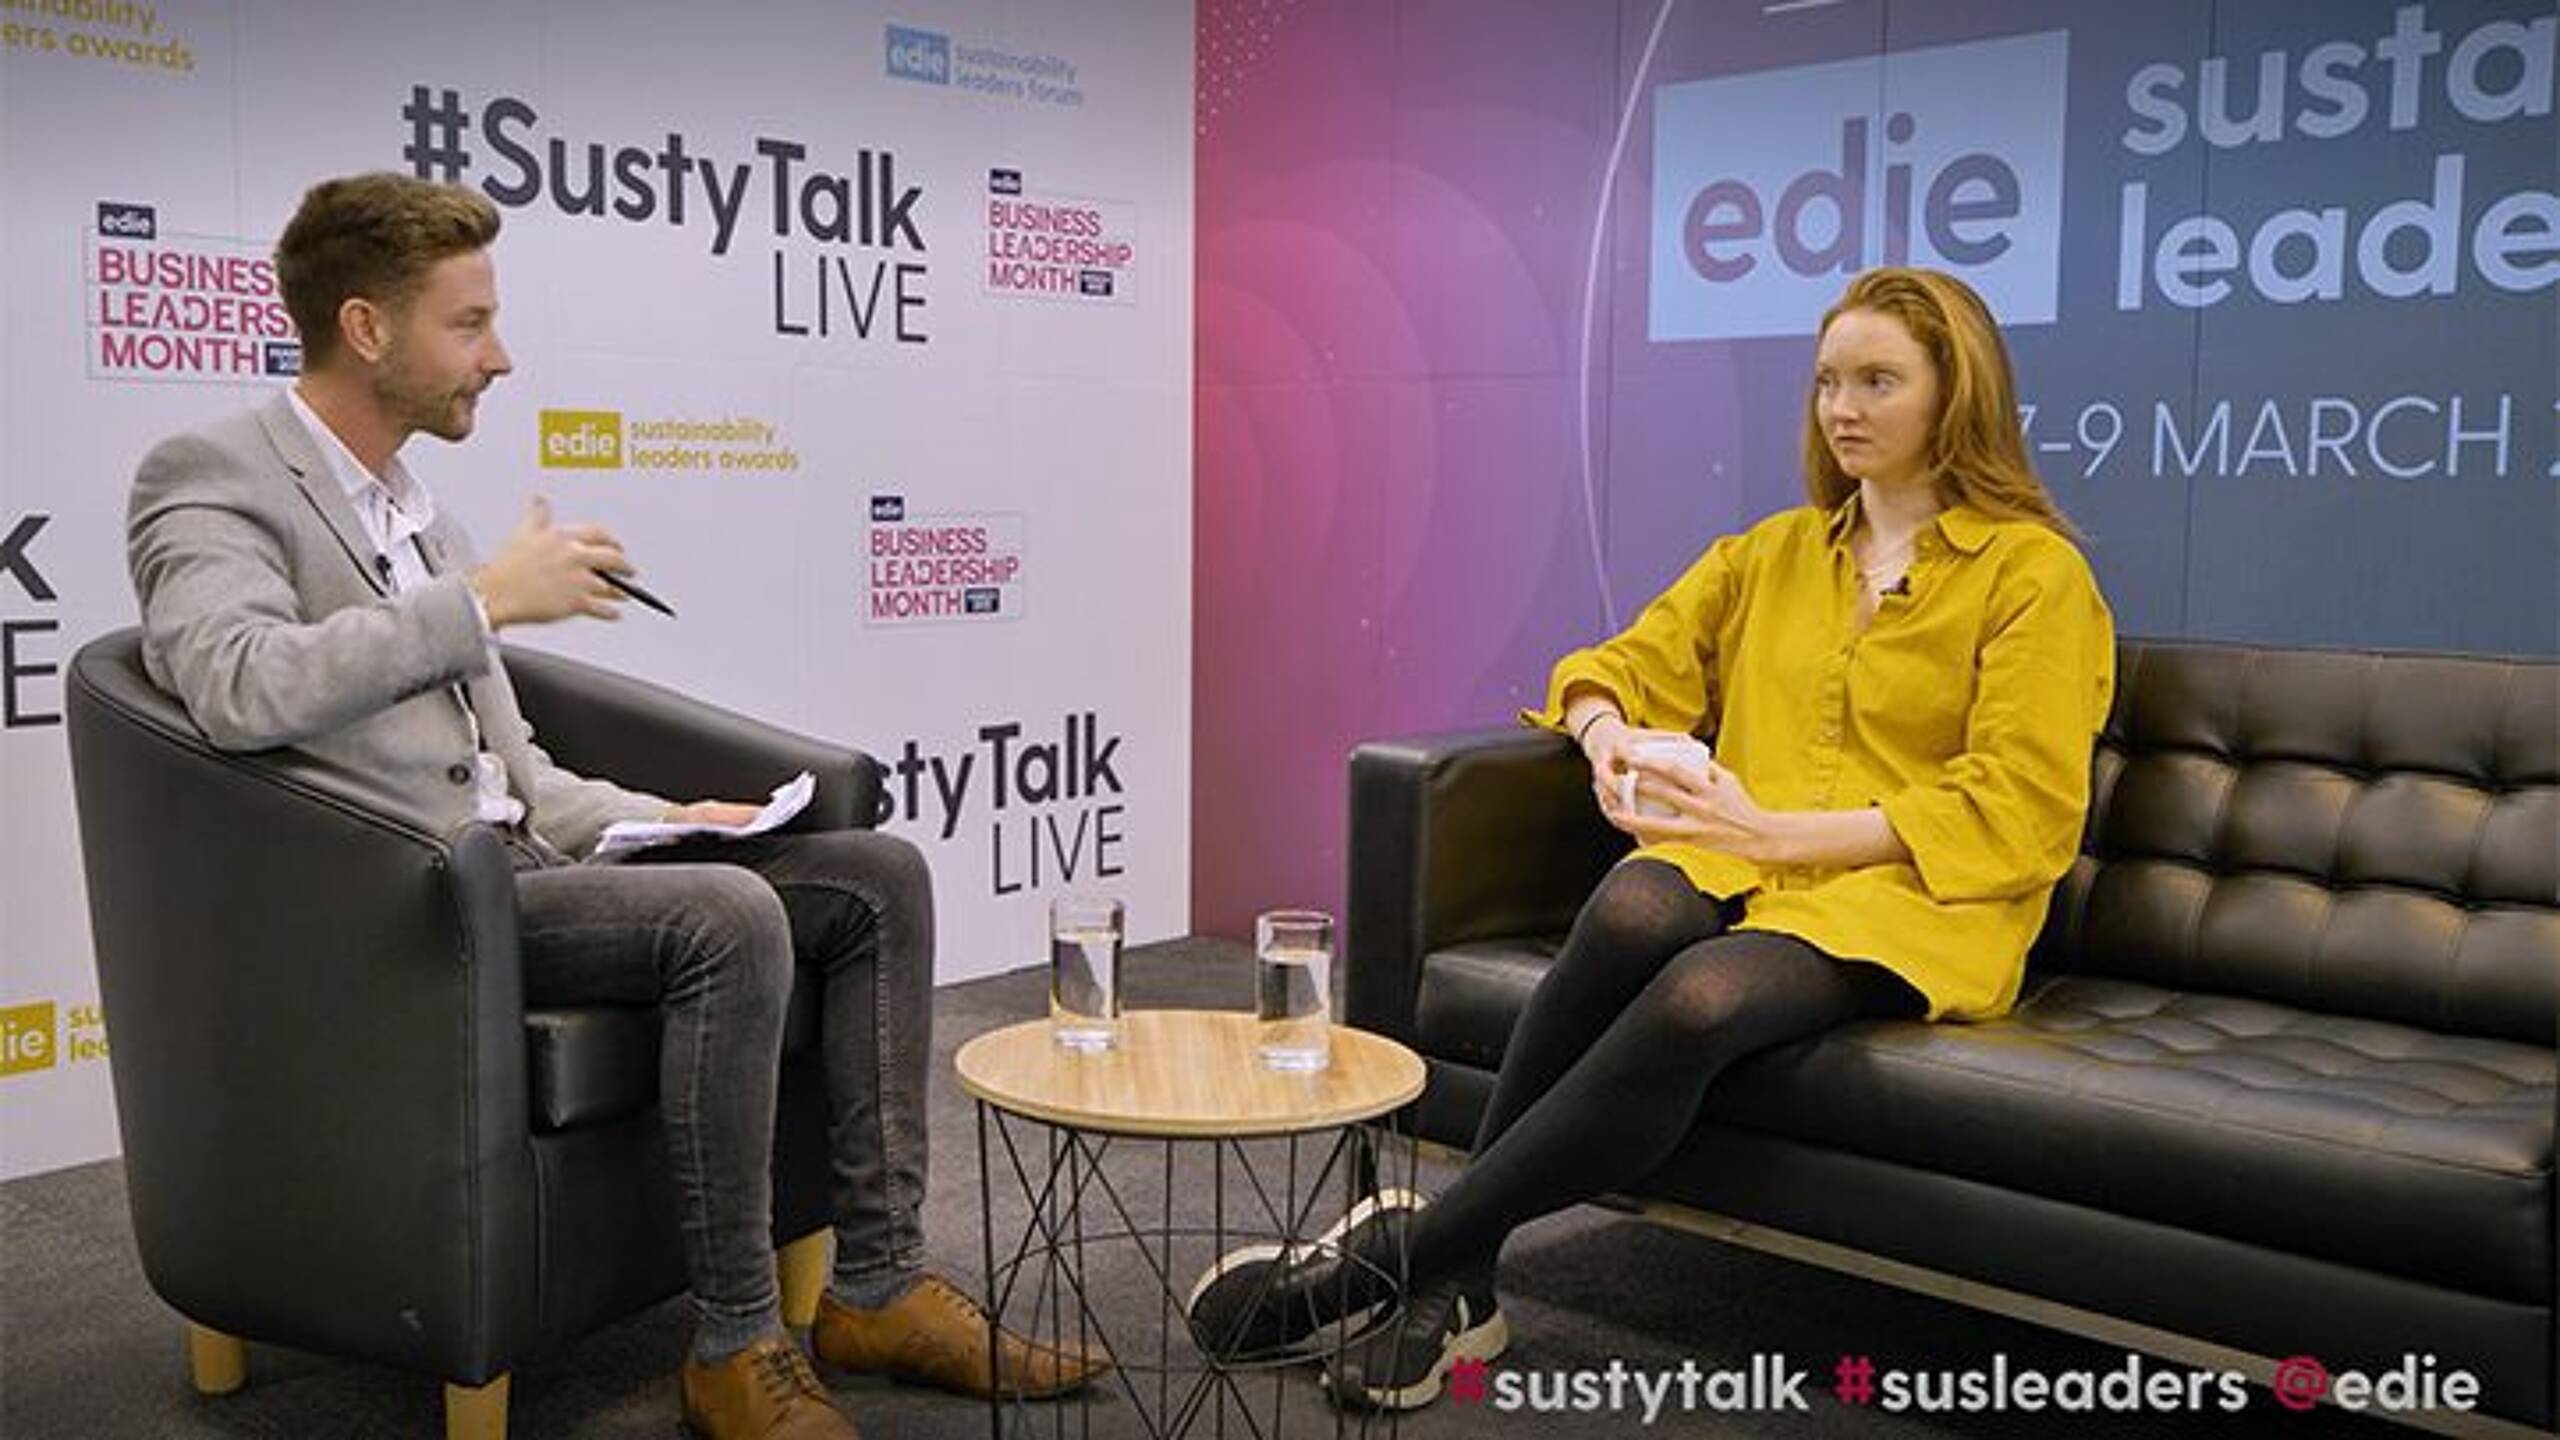 SustyTalk Live: Climate activist Lily Cole on making businesses a force for good